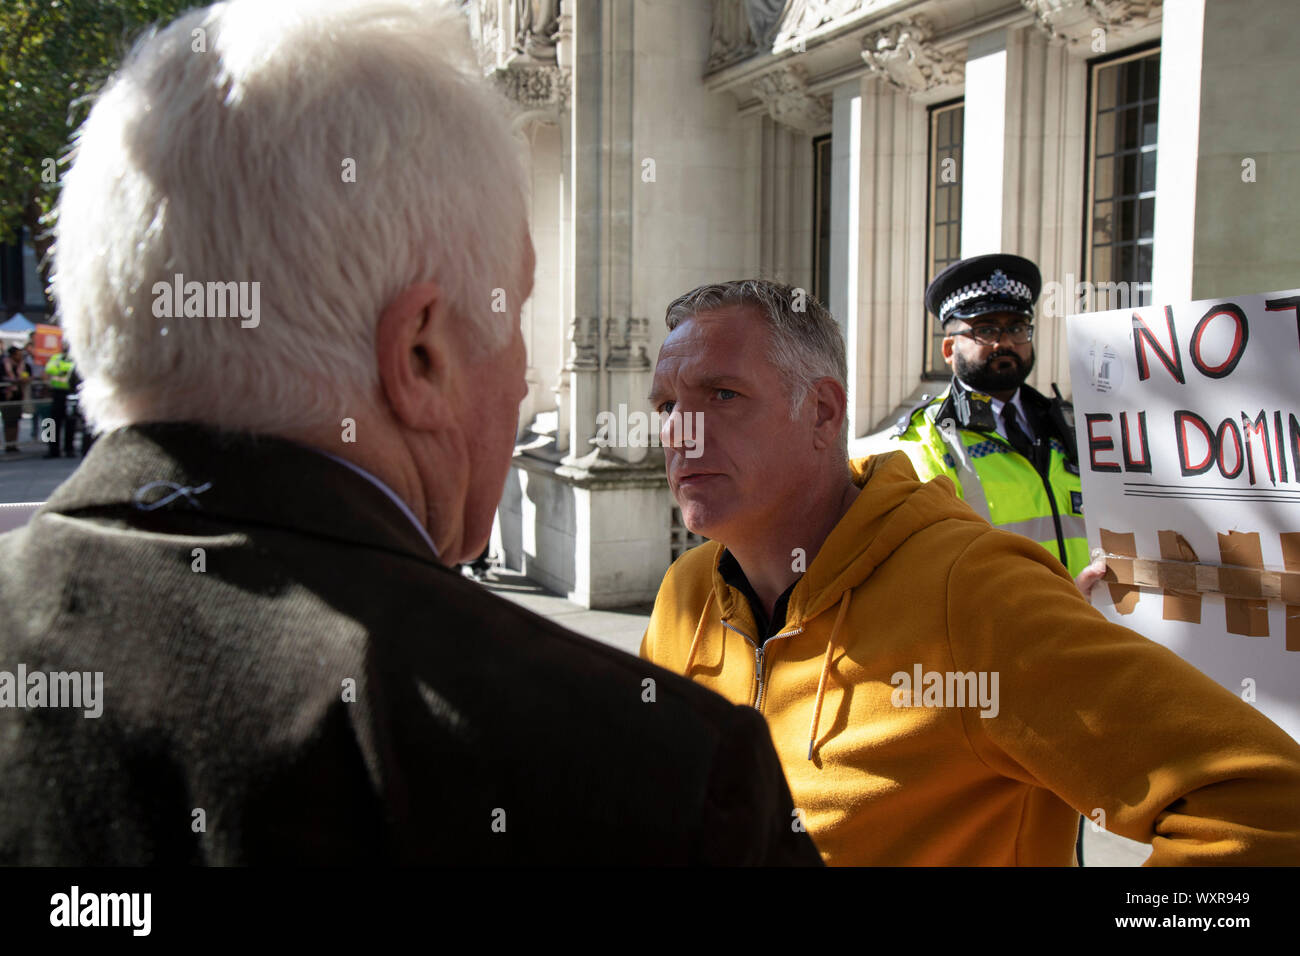 Television presenter and broadcaster David Dimbleby speaks to pro-leave protesters outside The Supreme Court as the first day of the hearing to rule on the legality of suspending or proroguing Parliament begins on September 17th 2019 in London, United Kingdom. The ruling will be made by 11 judges in the coming days to determine if the action of Prime Minister Boris Johnson to suspend parliament and his advice to do so given to the Queen was unlawful. David Dimbleby is a British journalist and former presenter of current affairs and political programmes, now best known for the BBCs long-running Stock Photo